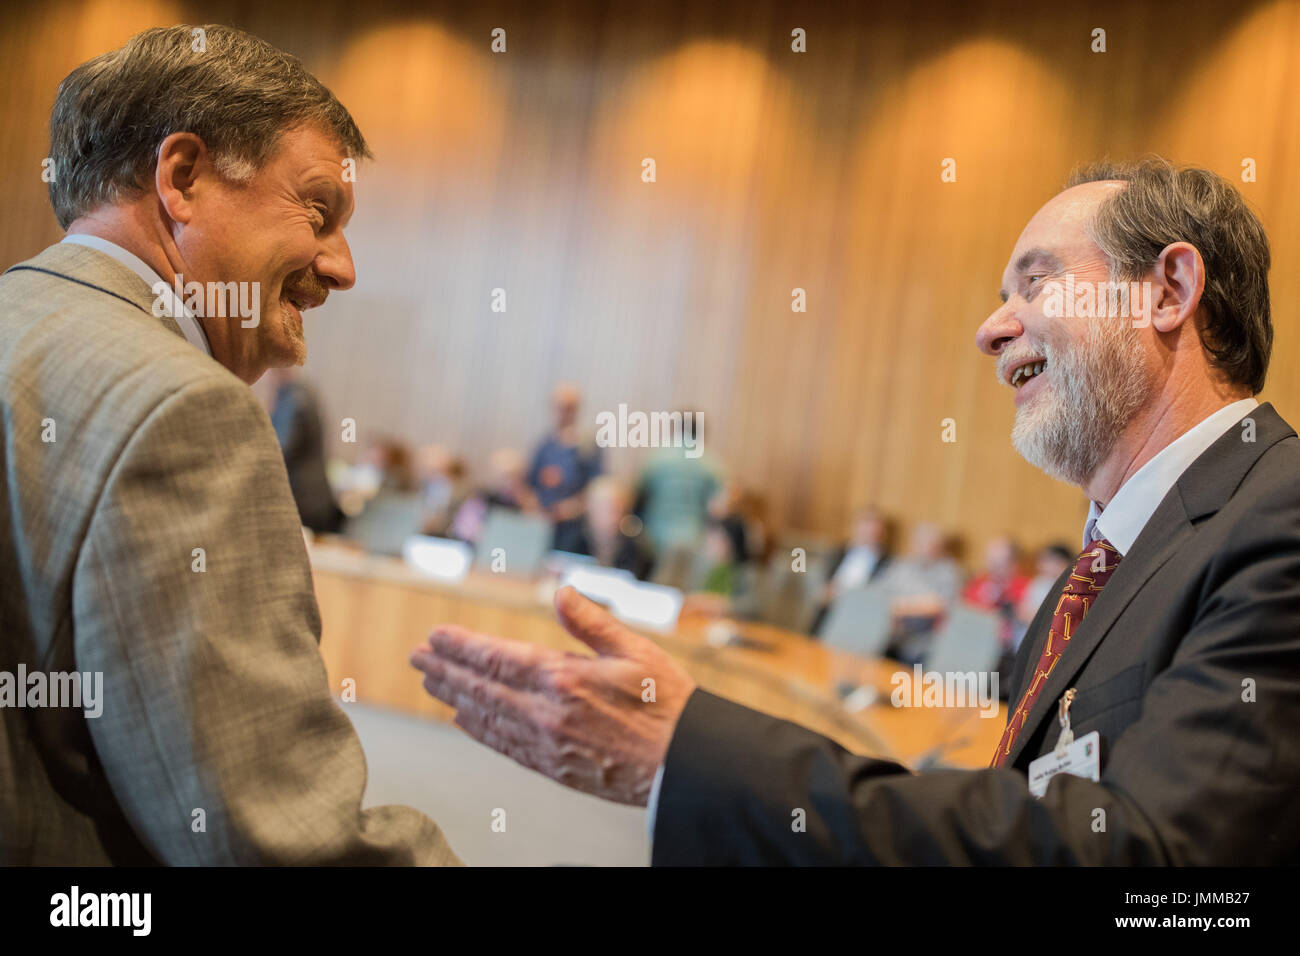 Duesseldorf, Germany. 28th July, 2017. The head of the state election Wolfgang Schellen (L) and the lawyer Christian Bill of the party AfD greet one another at the state parliament in Duesseldorf, Germany, 28 July 2017. The state electoral committee will decide over the admission of state election lists for the federal parliamentary elections. The decision regarding the right-wing populist party AfD is especially anticipated. Photo: Rolf Vennenbernd/dpa/Alamy Live News Stock Photo